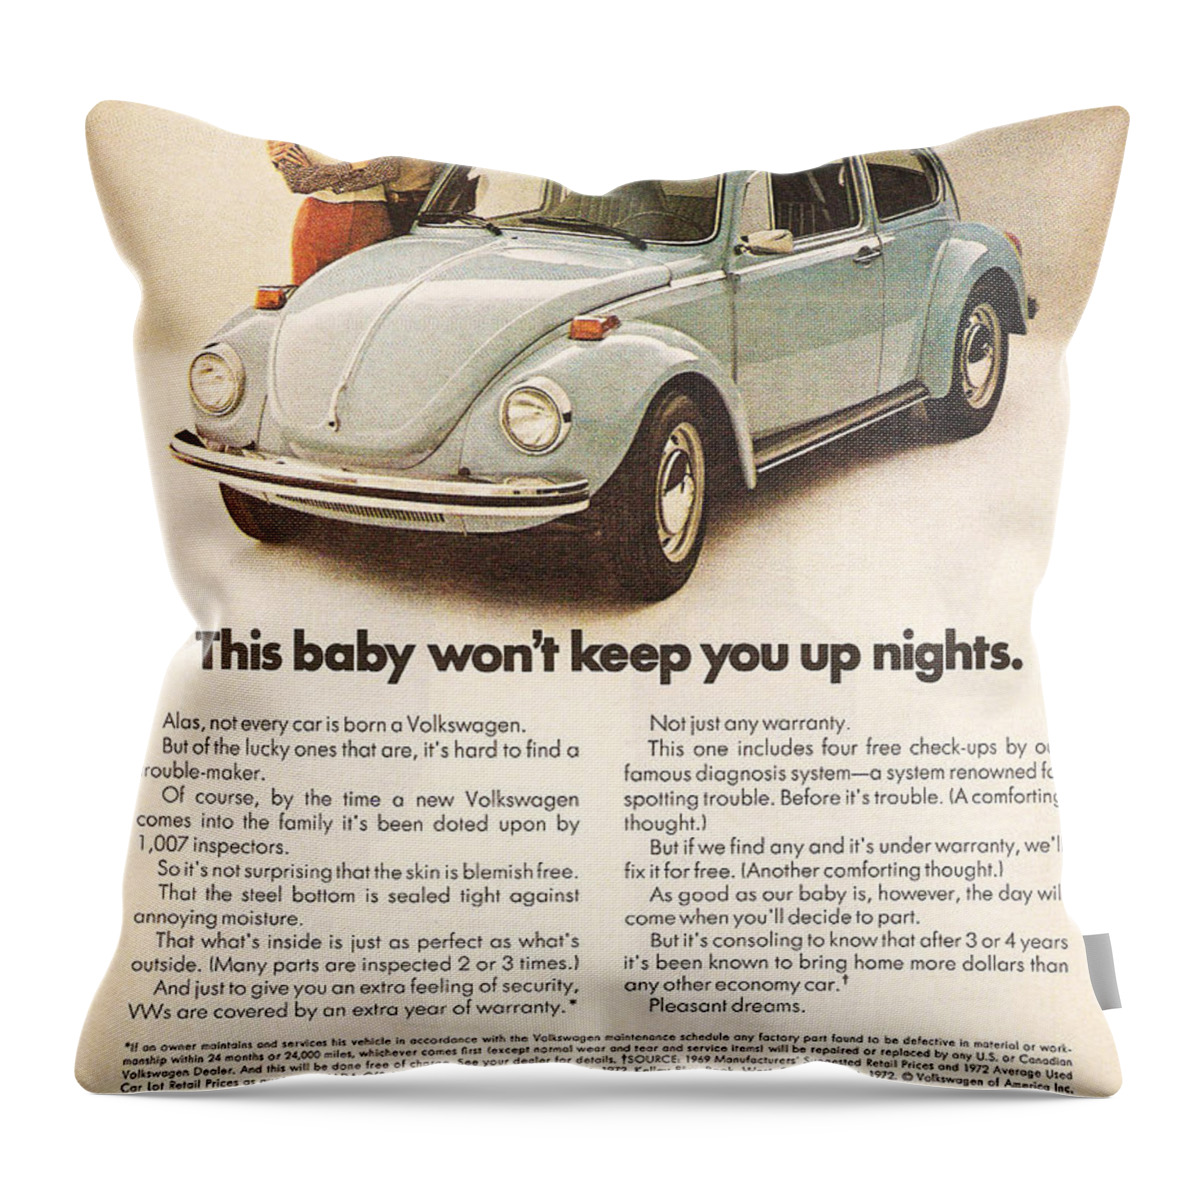 Vw Beetle Throw Pillow featuring the digital art This baby won't keep you up nights by Georgia Clare